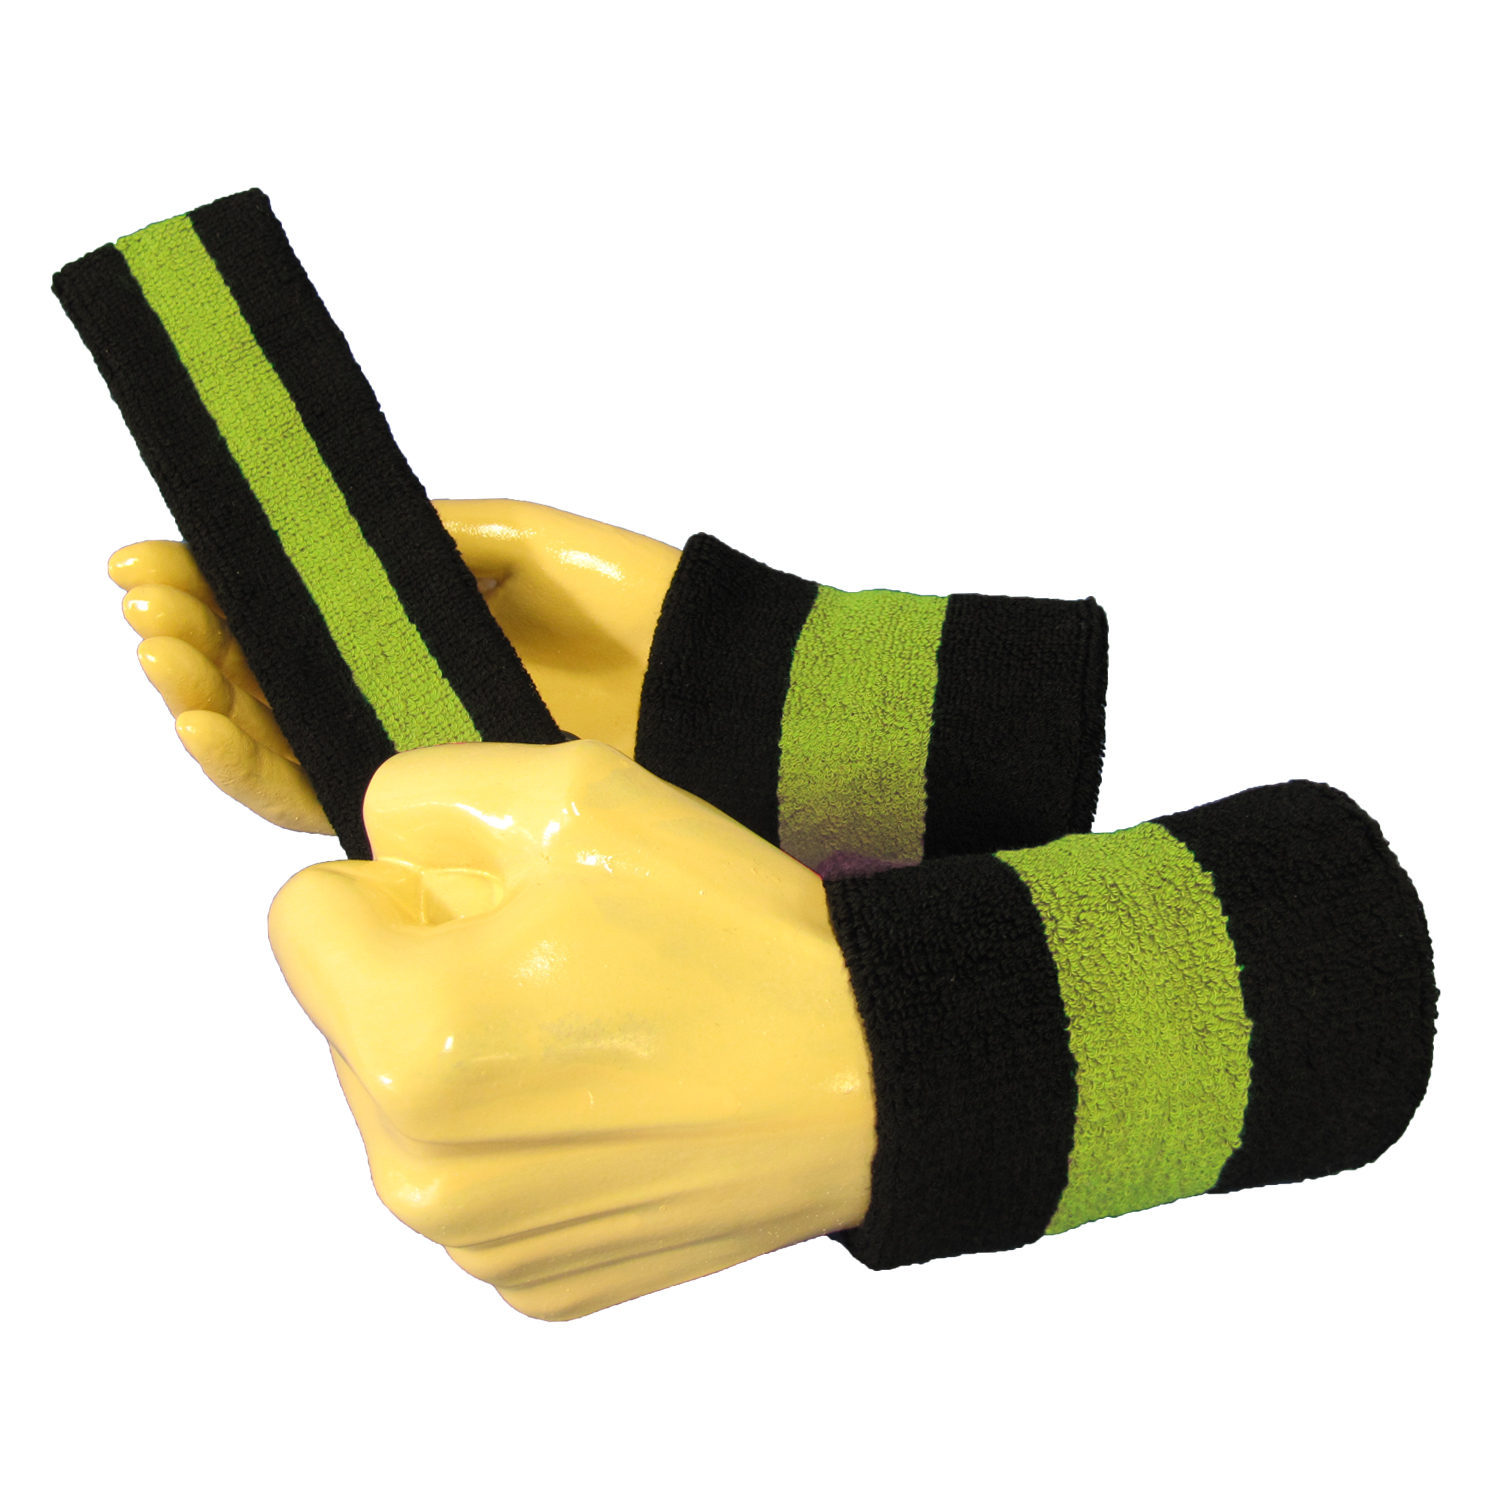 Black Bright Lime Green black 2color striped Terry sweatbands set